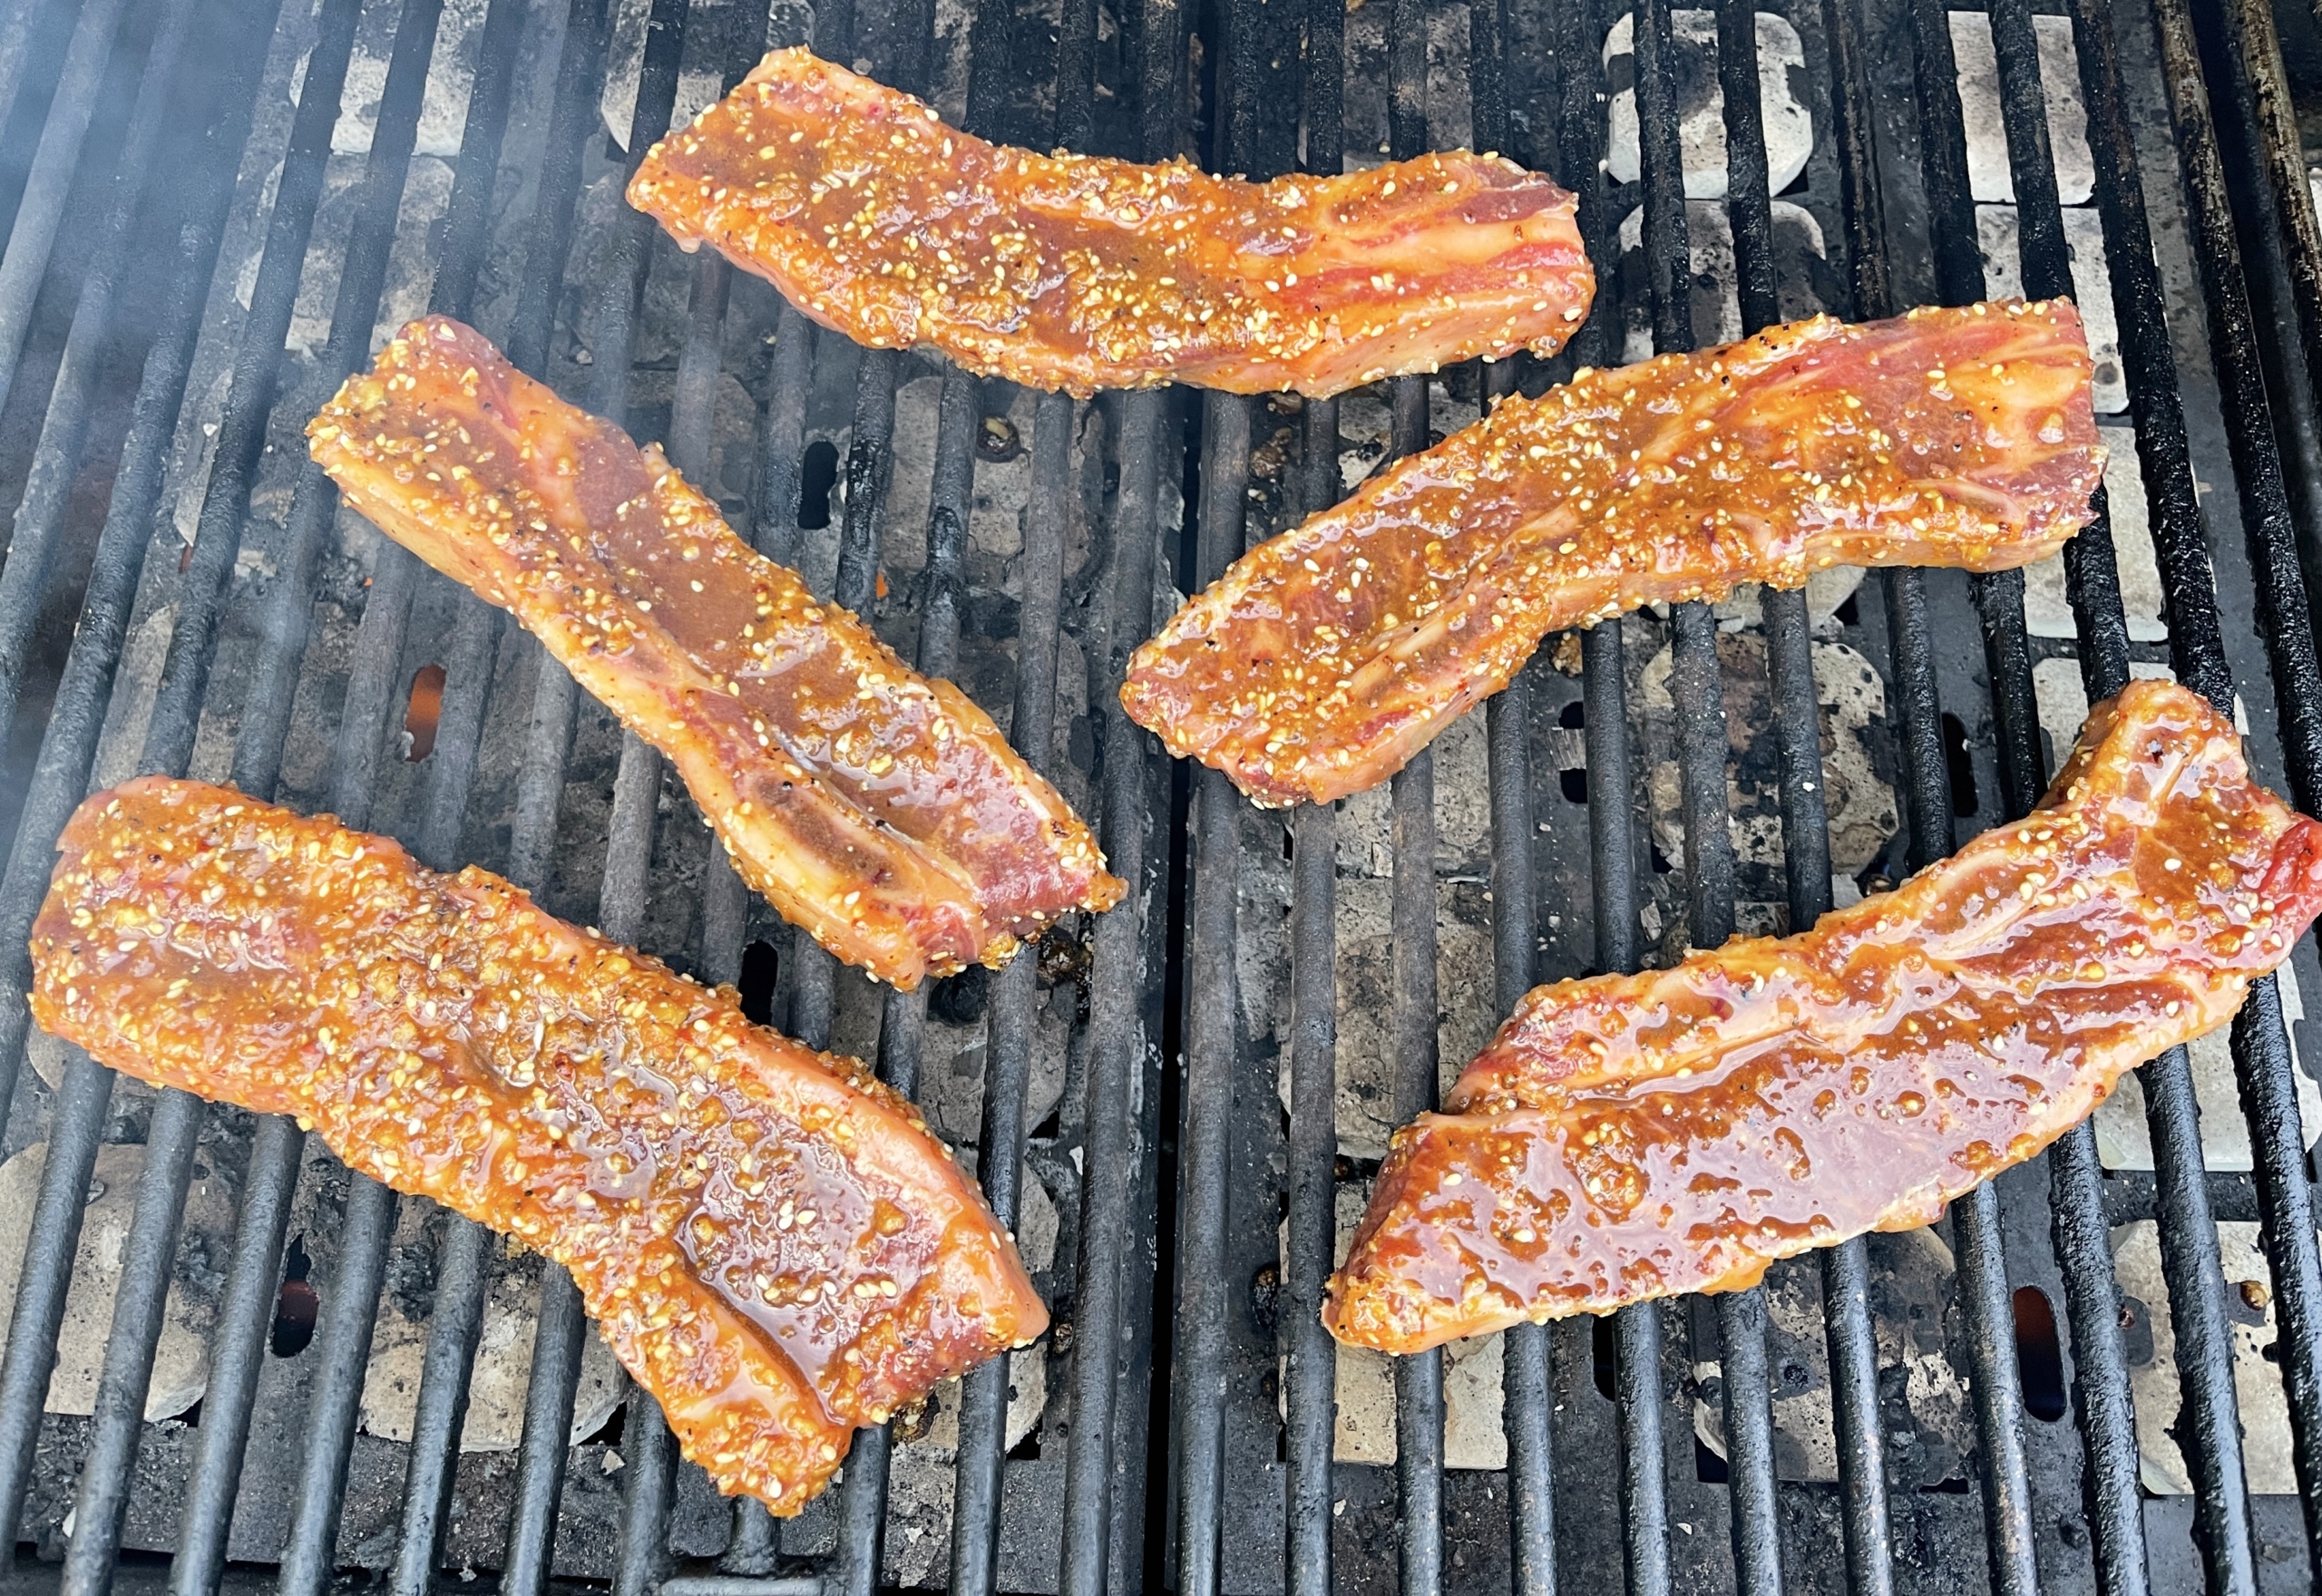 Place short ribs on an oiled grill over medium high heat